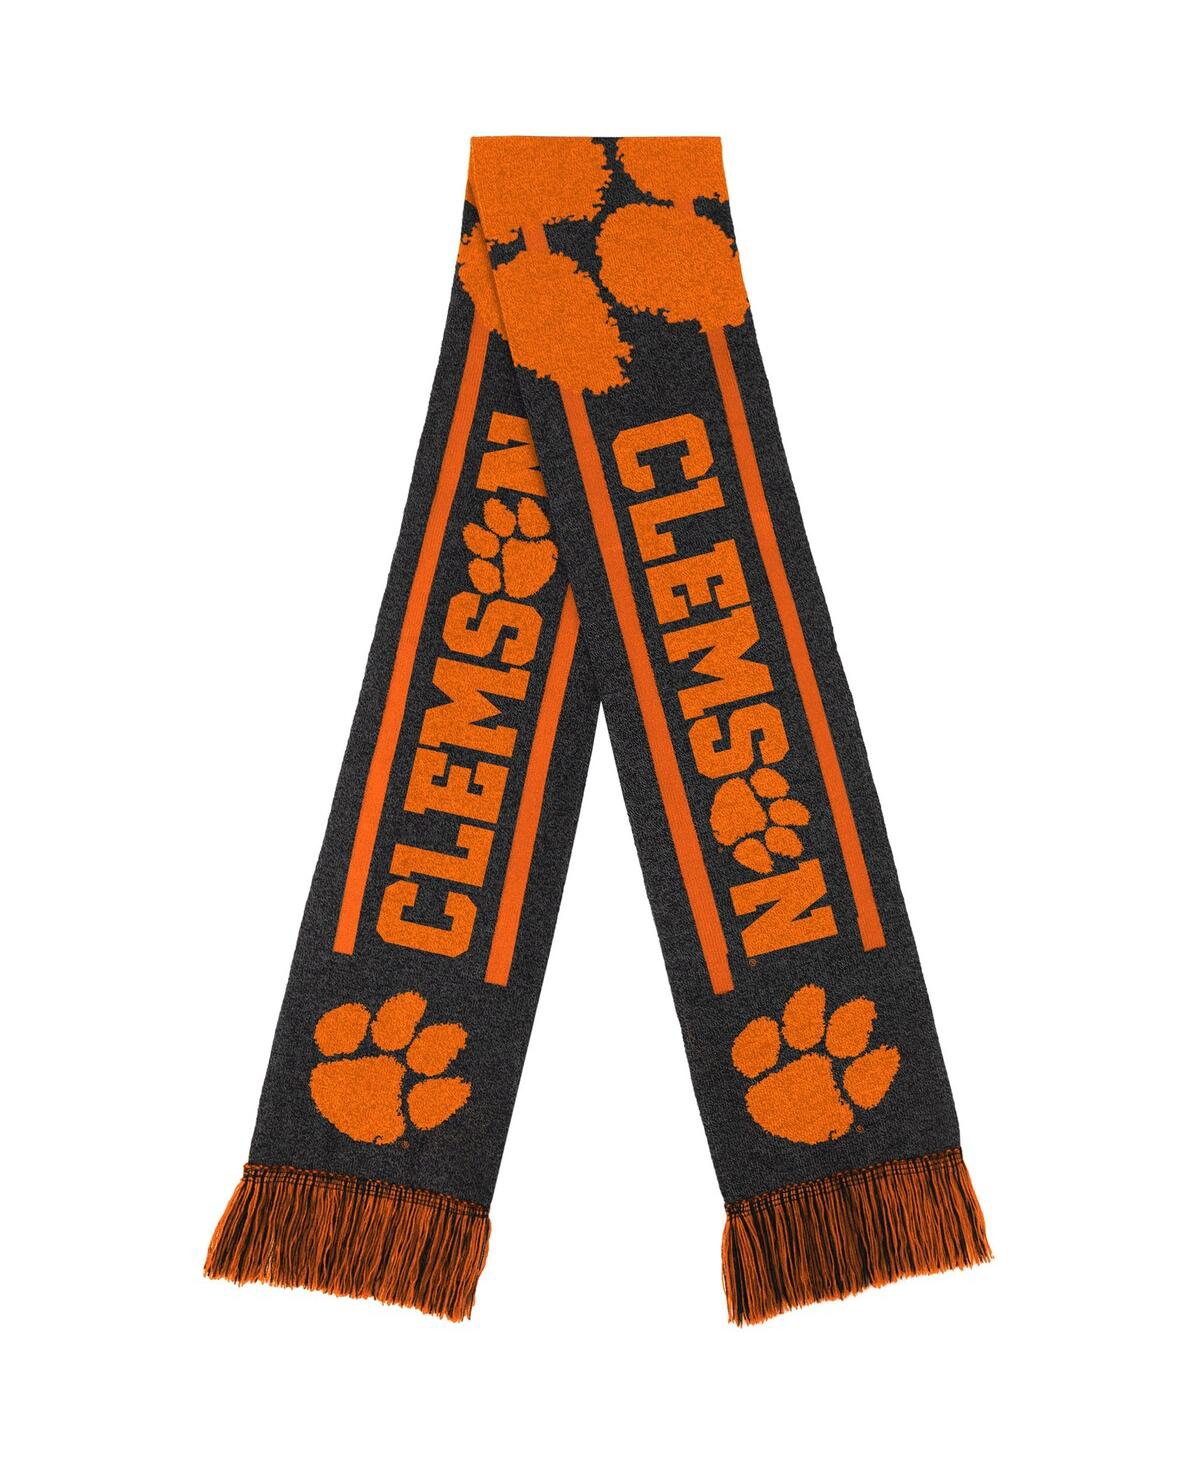 Men's and Women's Foco Clemson Tigers Scarf - Gray